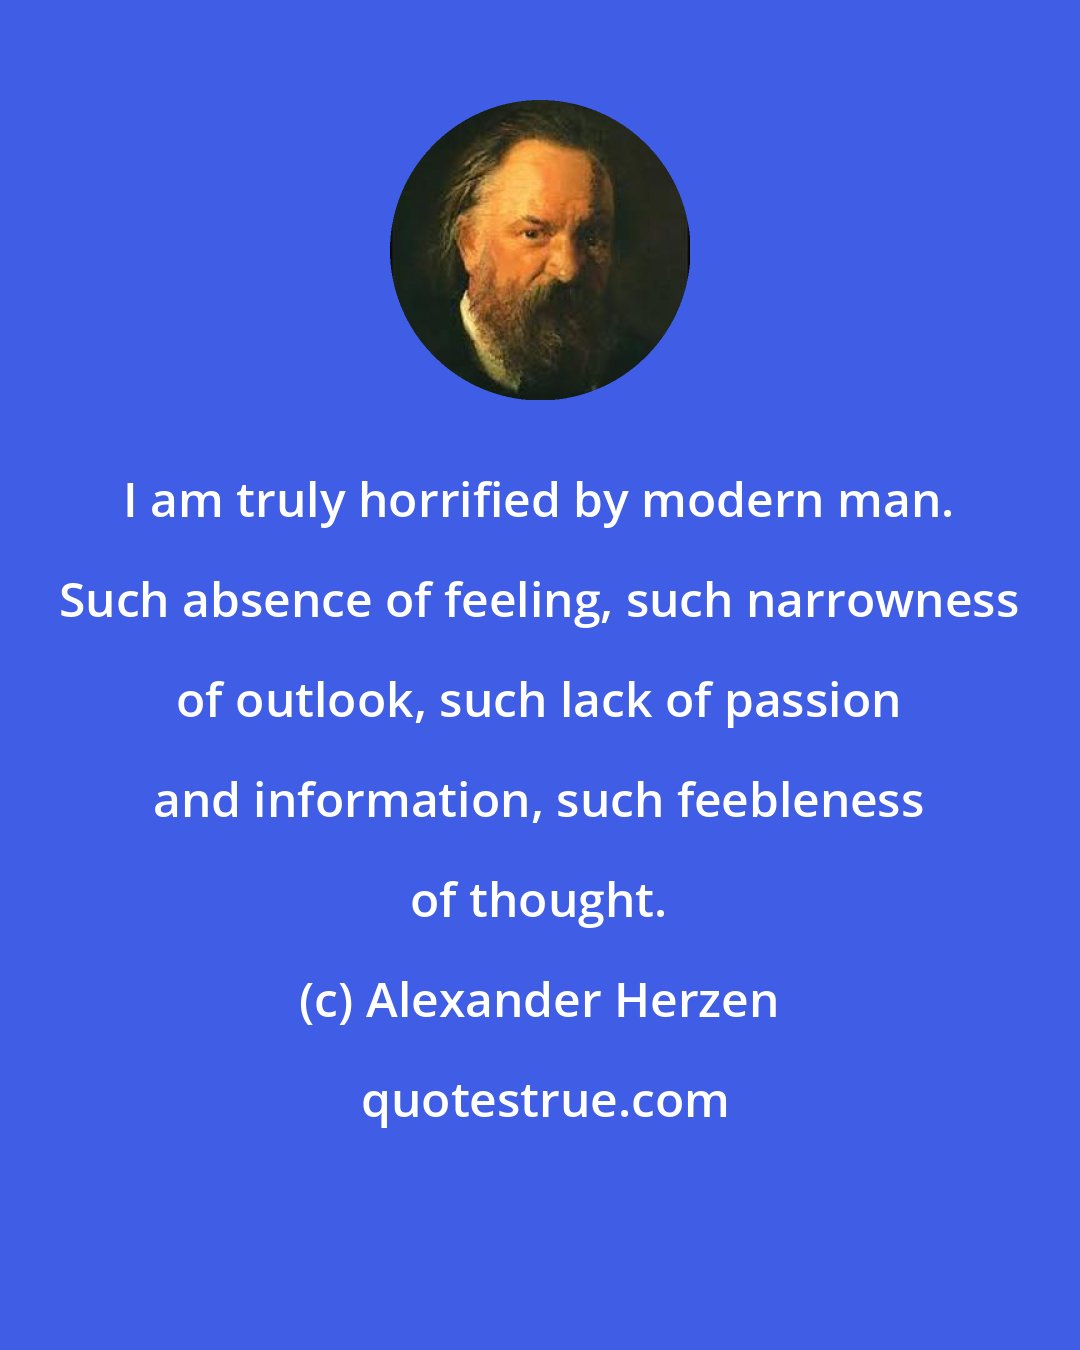 Alexander Herzen: I am truly horrified by modern man. Such absence of feeling, such narrowness of outlook, such lack of passion and information, such feebleness of thought.